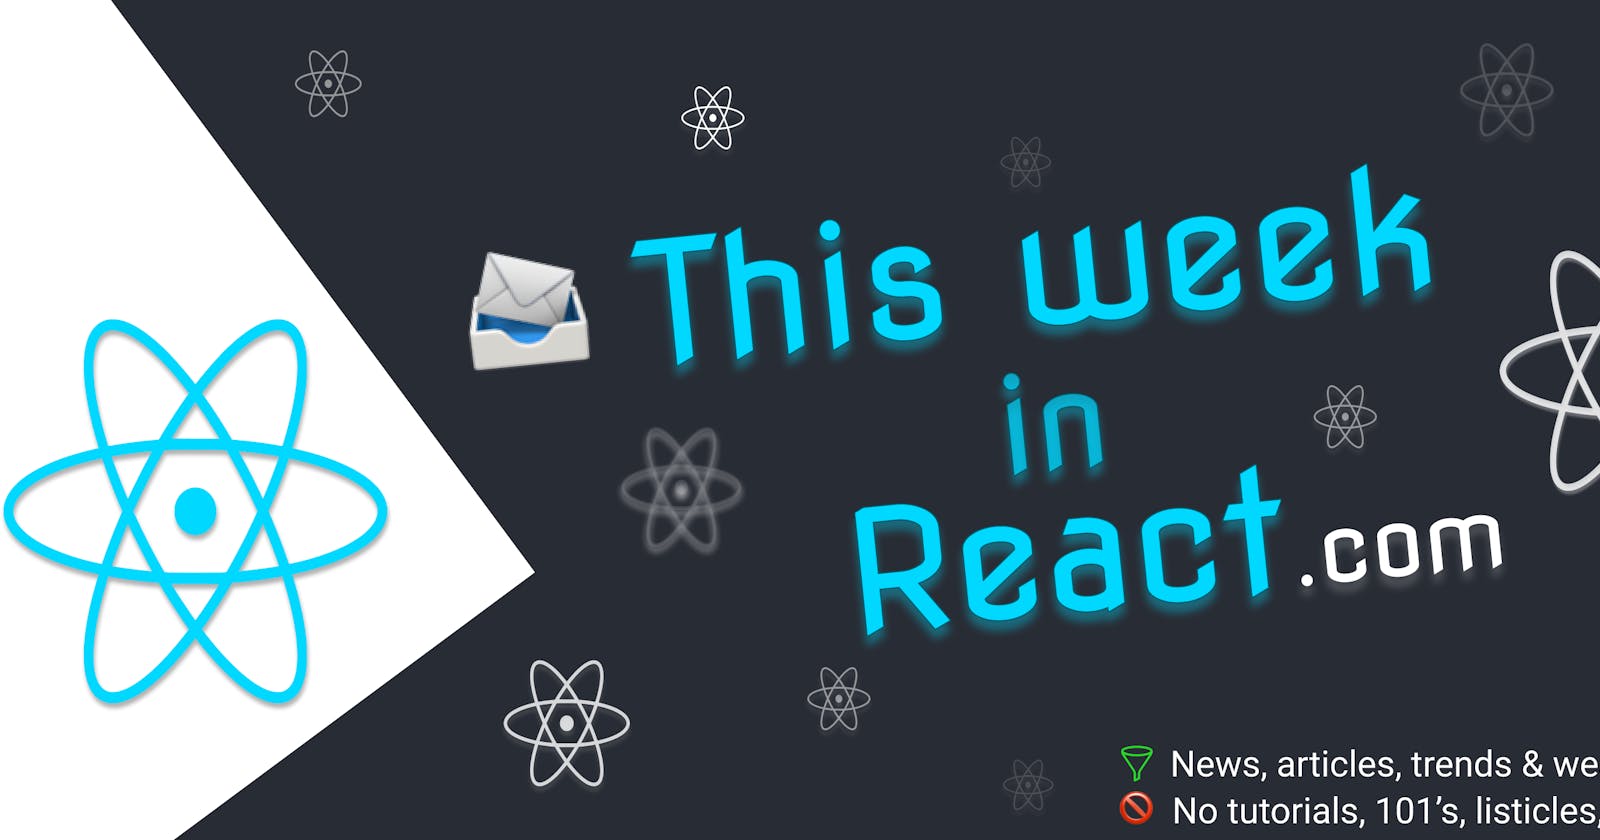 This Week In React #177: Skia, Pigment, Mist, Storybook, shadcn/ui, Hydration Diff, Geiger, MDXTS, Remotion, WinterJS, Astro, Rolldown, Tailwind...